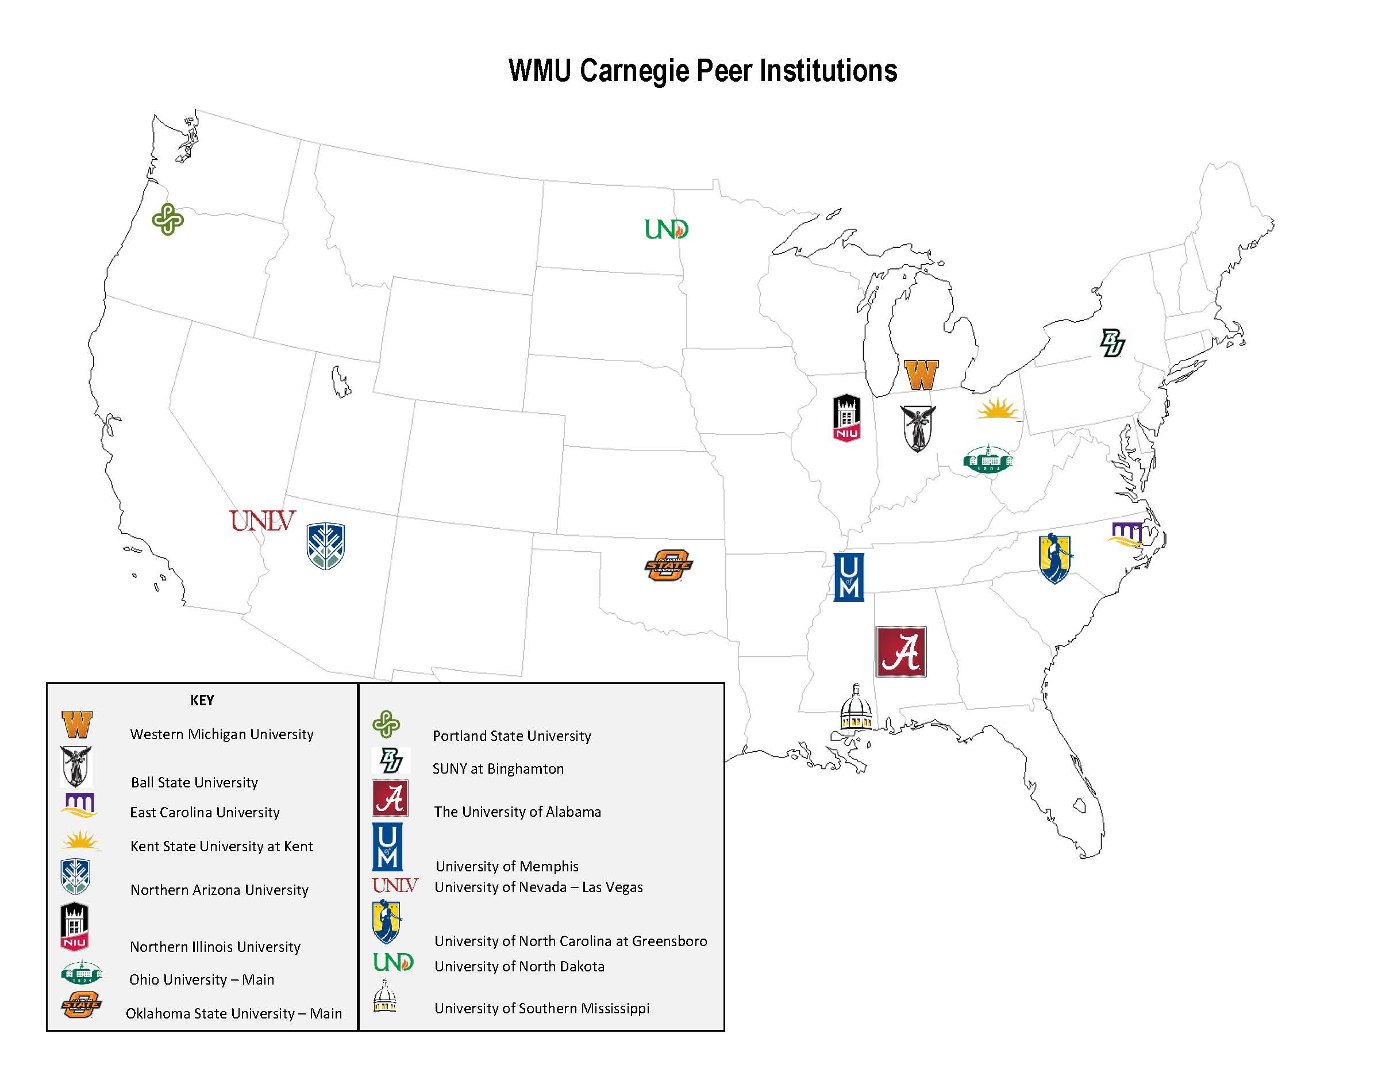 Map showing the main campus locations of WMU's Carnegie peer institutions